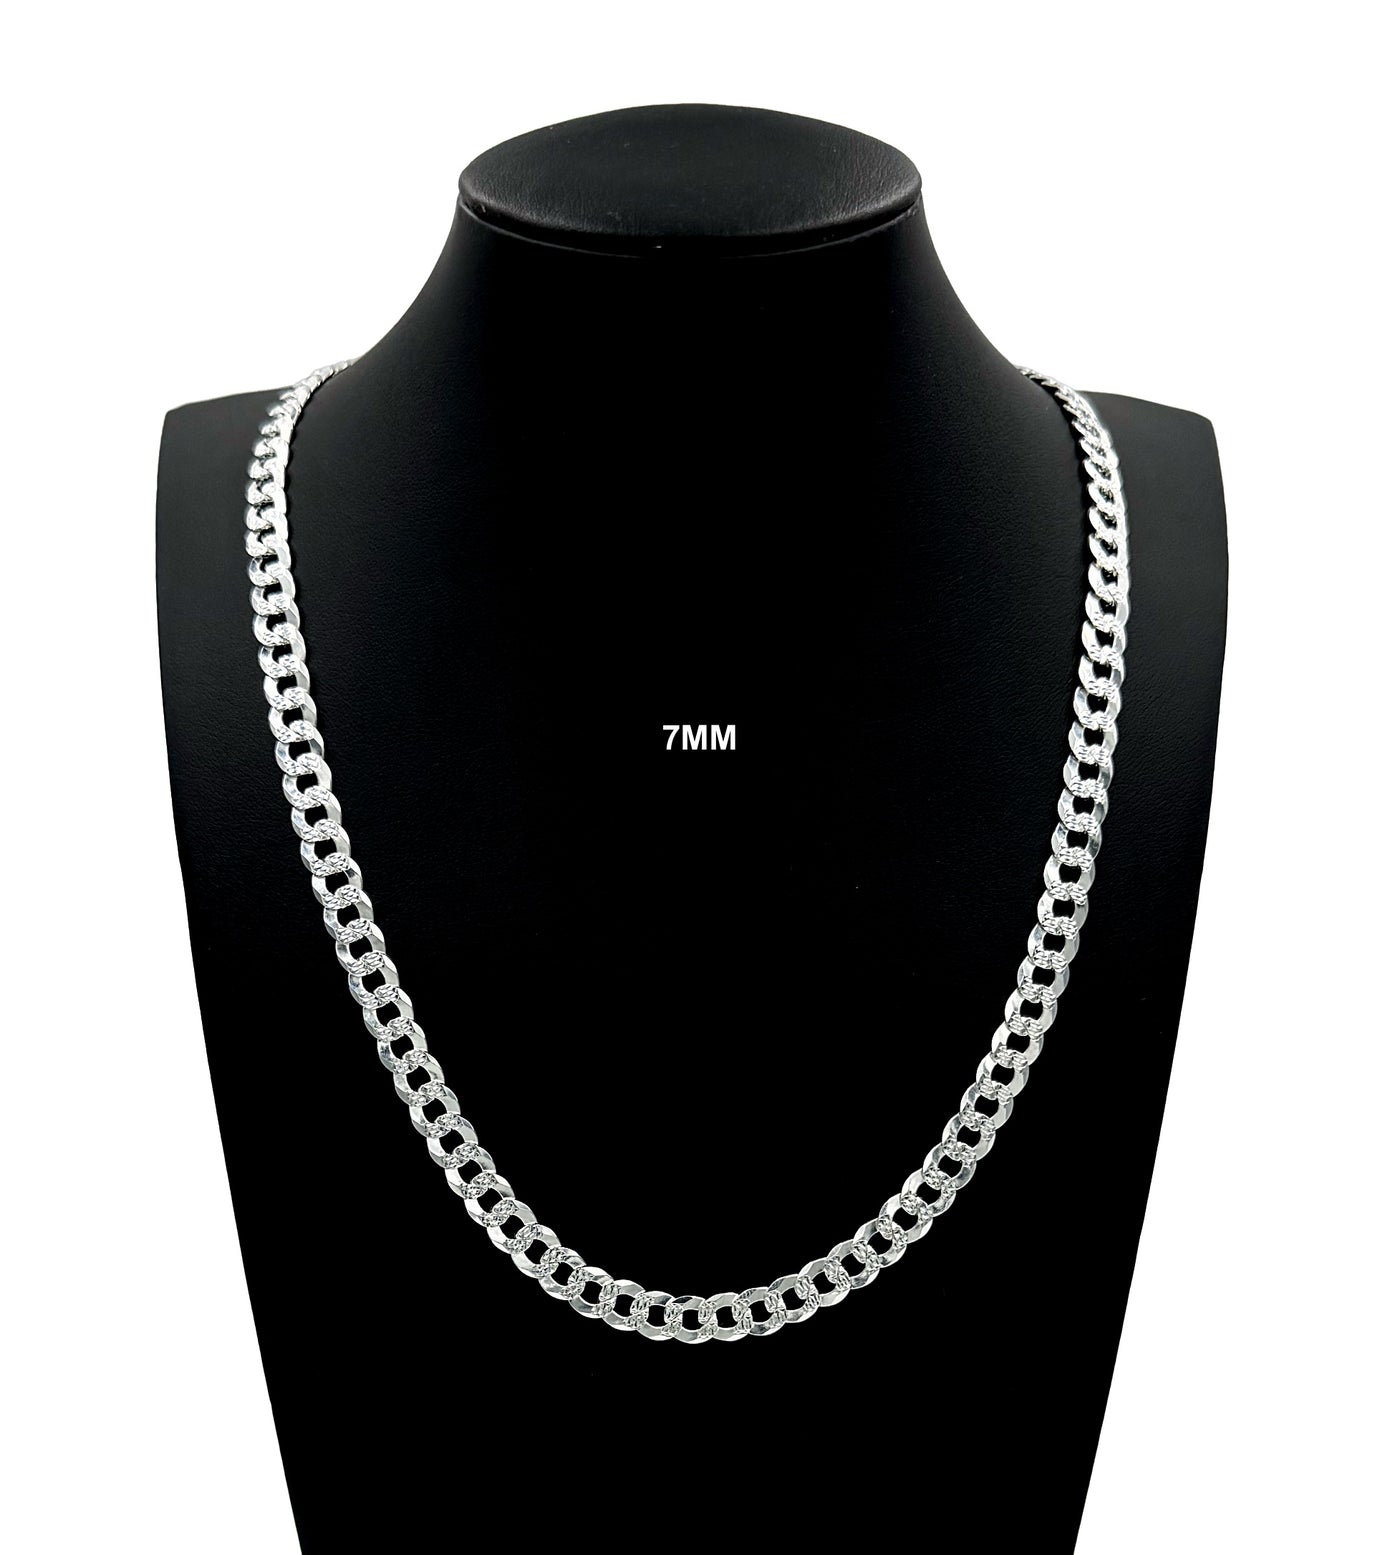 7MM Solid 925 Sterling Silver Diamond Cut Cuban Curb Chain Necklace or Bracelet ITALY